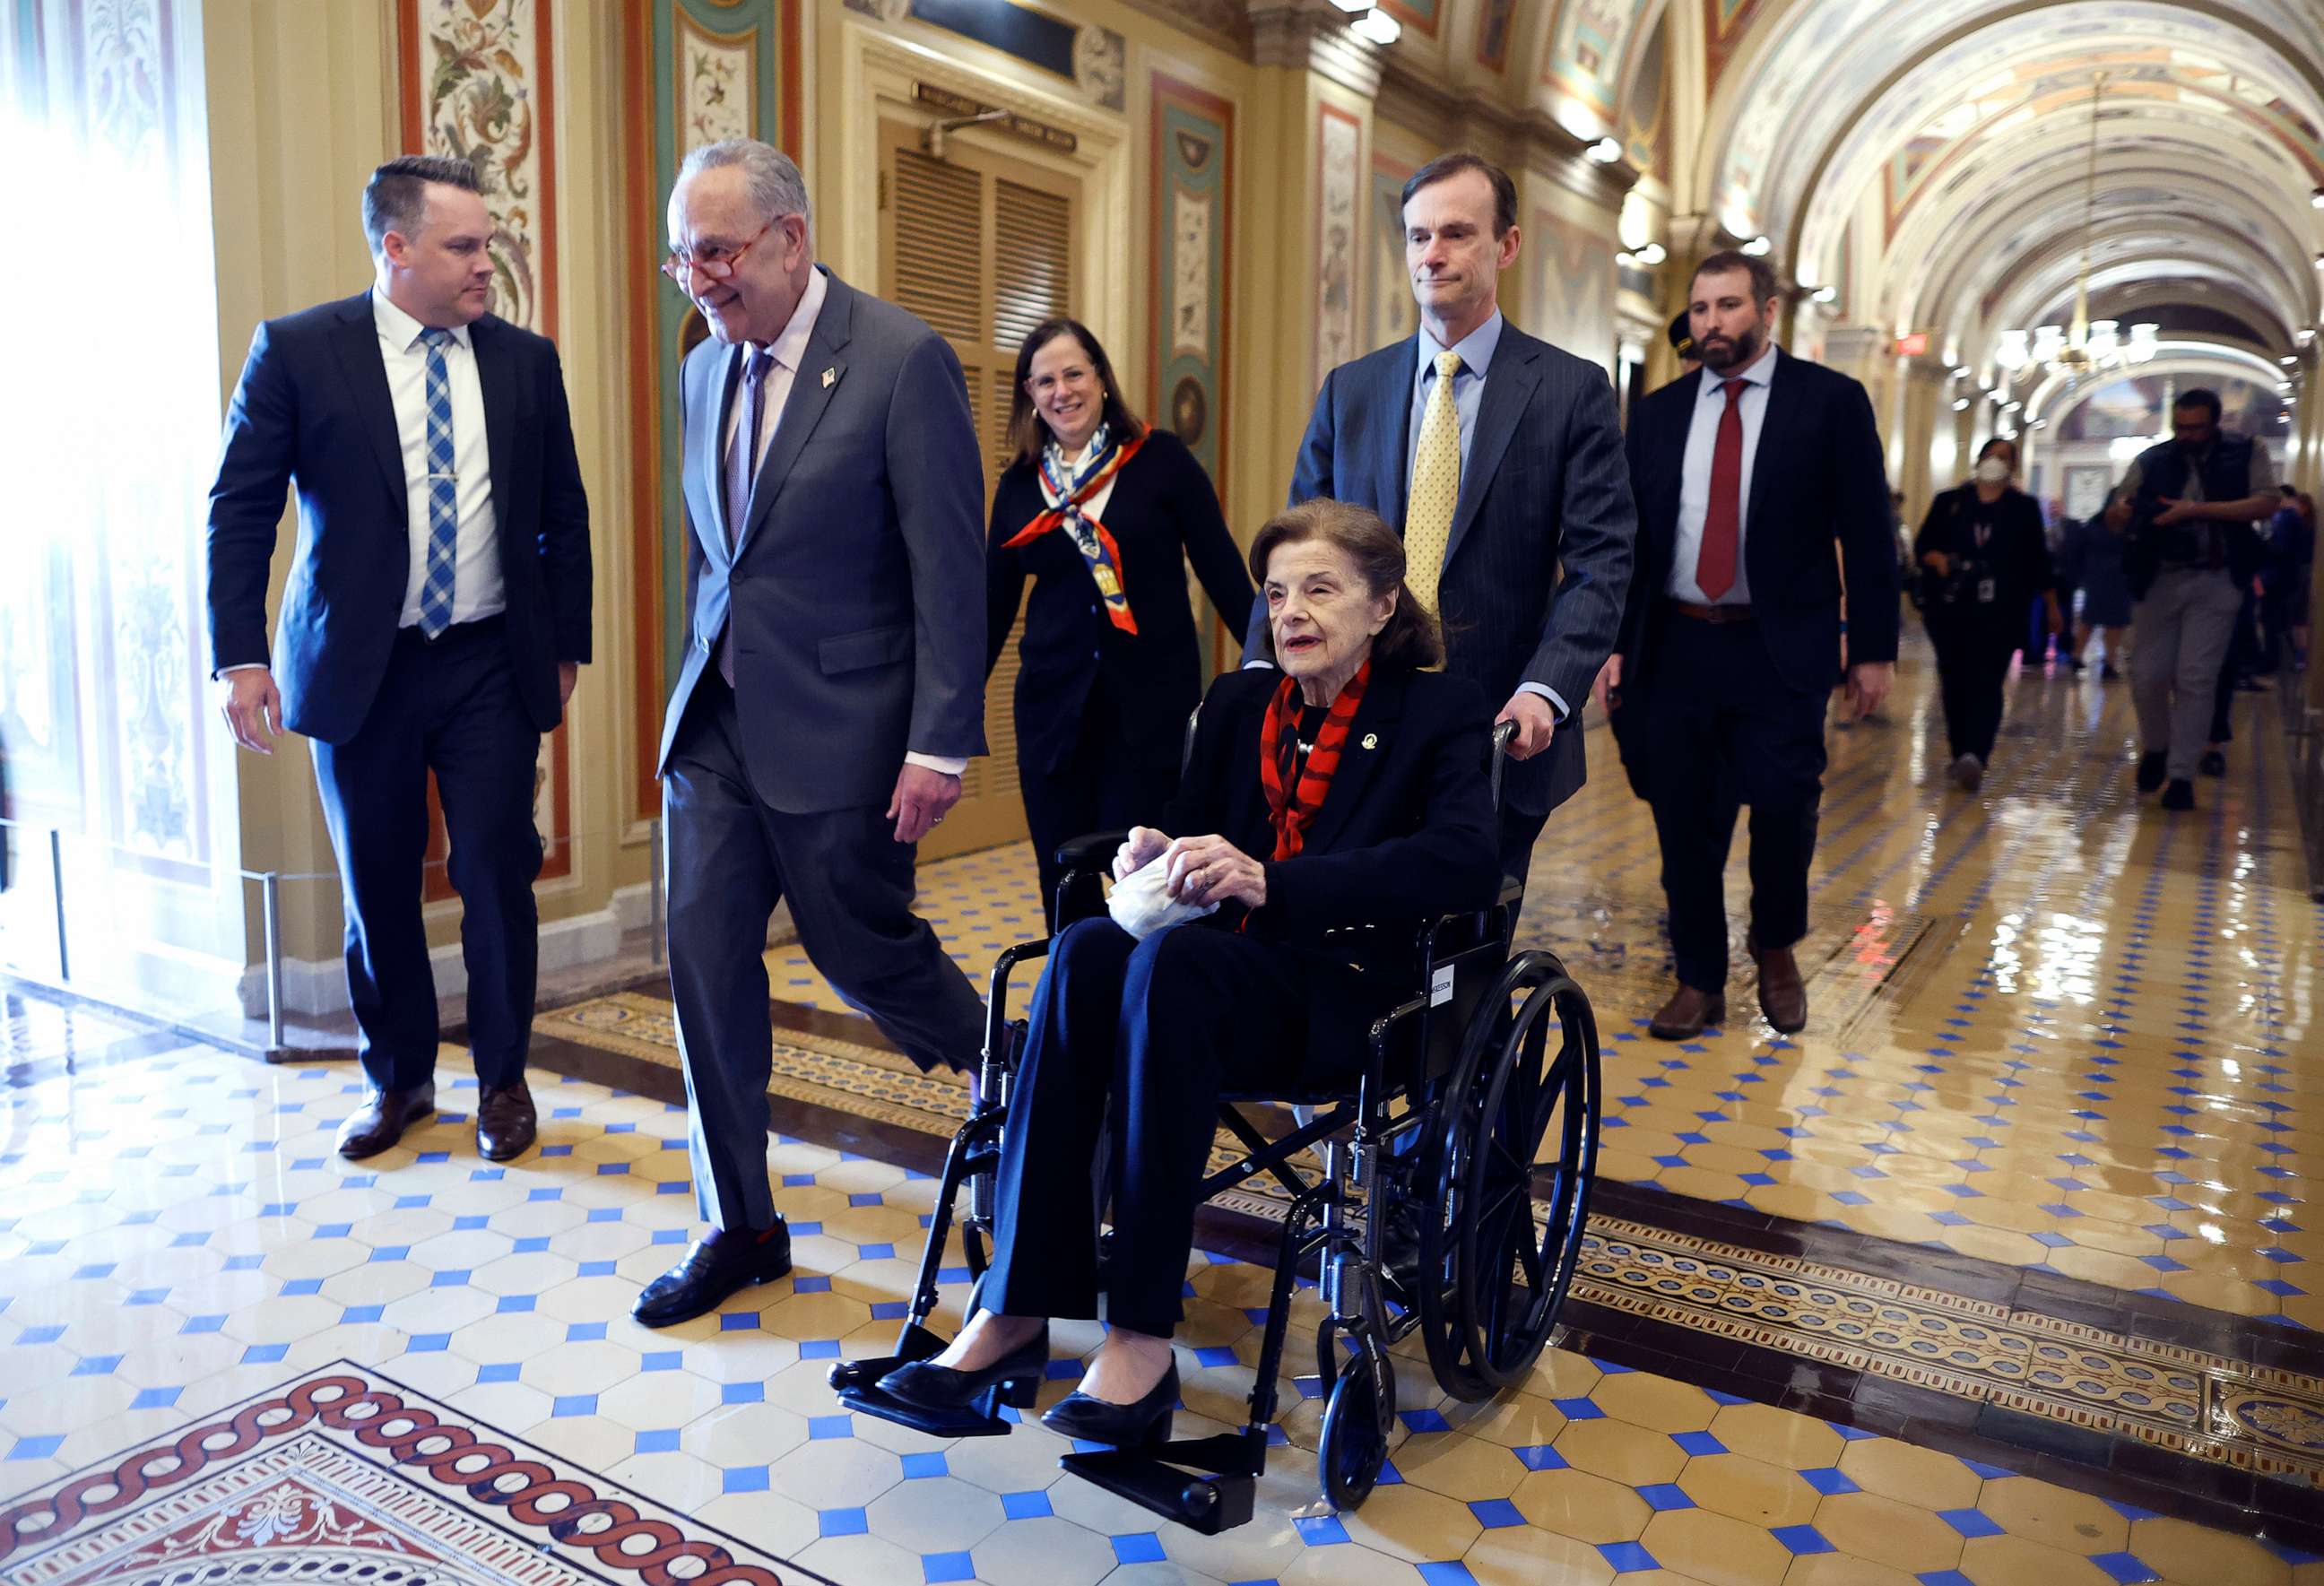 PHOTO: Sen. Dianne Feinstein is escorted by Senate Majority Leader Chuck Schumer as she arrives at the U.S. Capitol following a long absence due to health issues, May 10, 2023, in Washington, D.C.